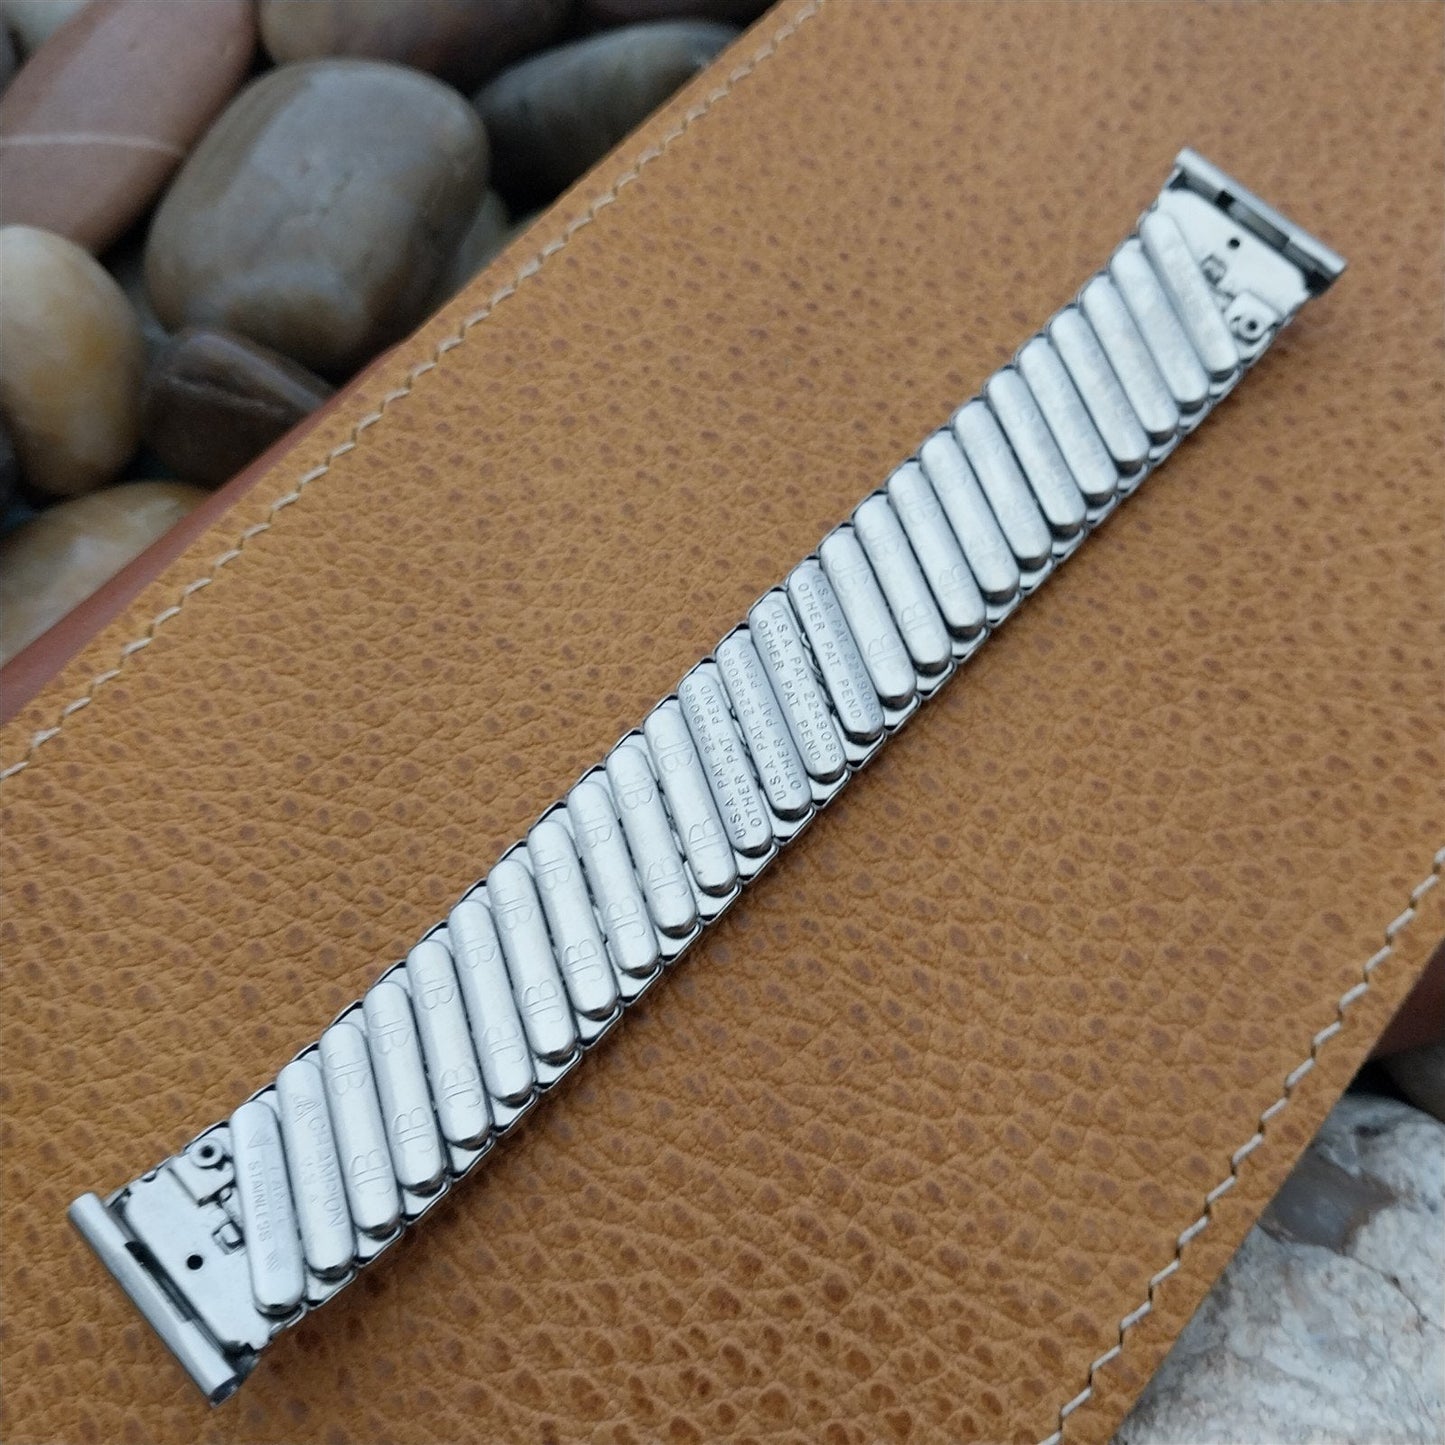 18mm 19mm Stainless Steel Expansion JB Champion Unused 1960s Vintage Watch Band